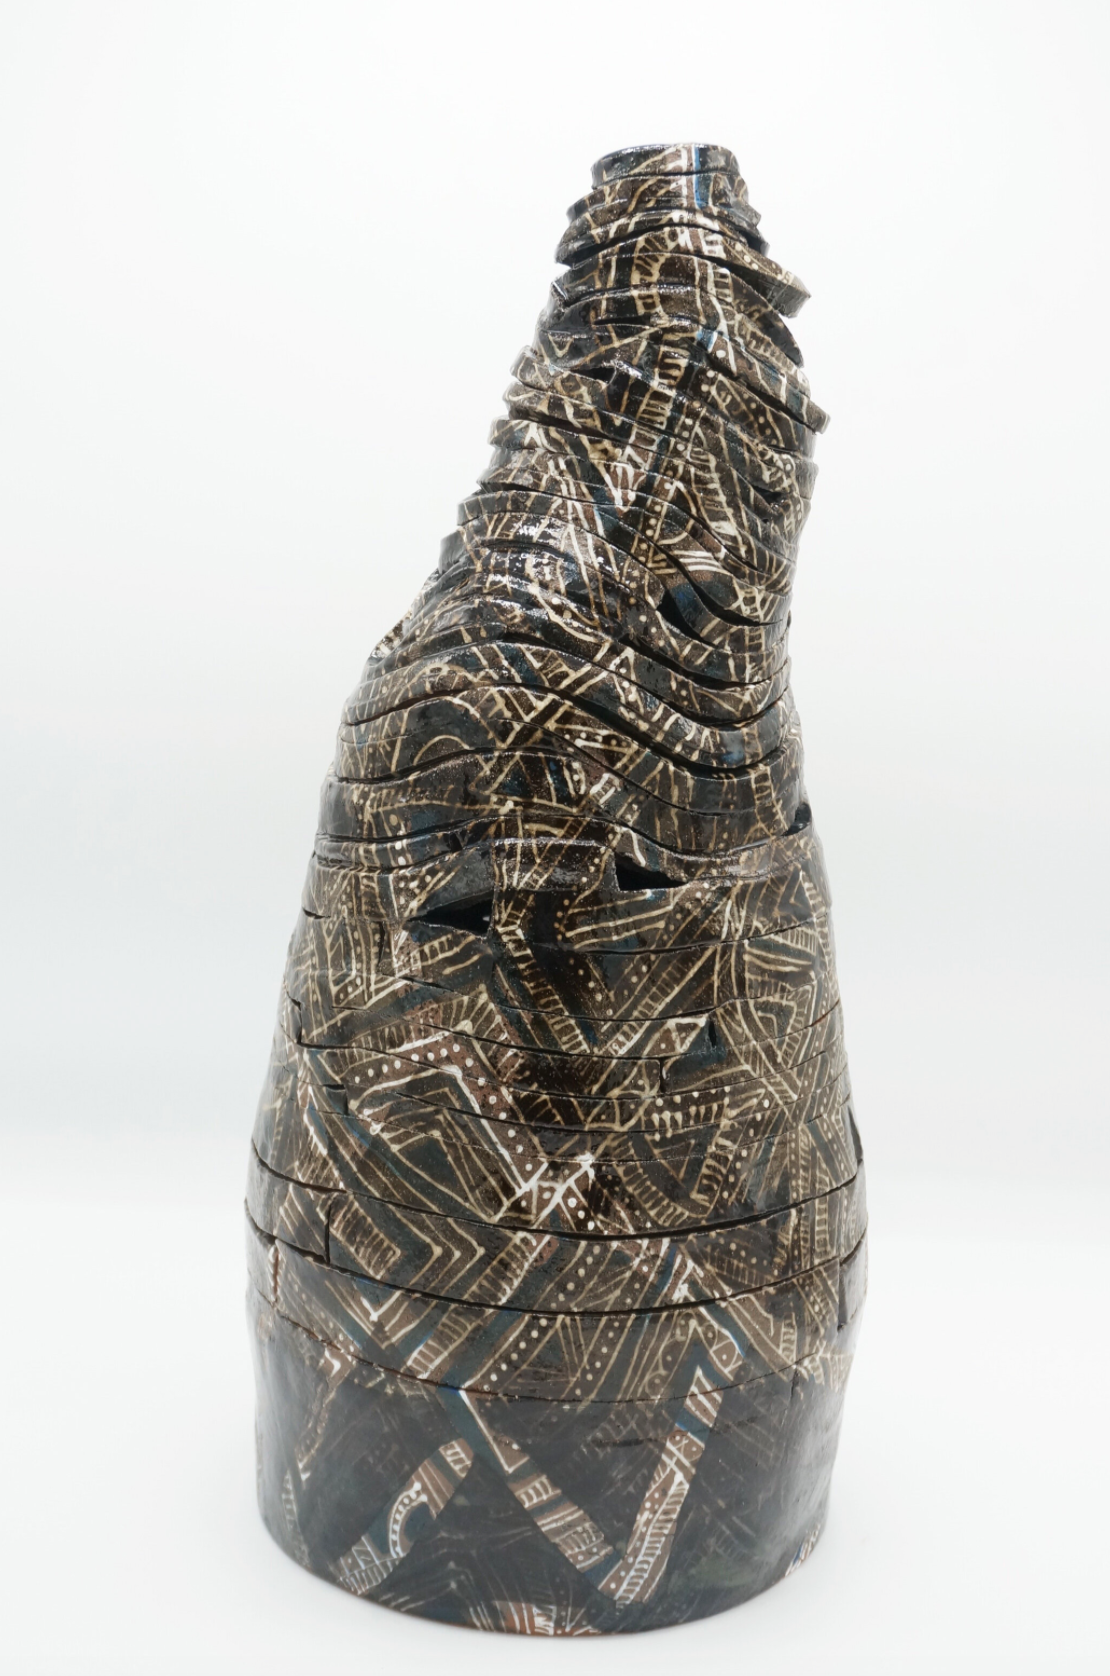 Cone shaped ceramic sculpture in the form of spiraling ribbon patterned with brown motifs